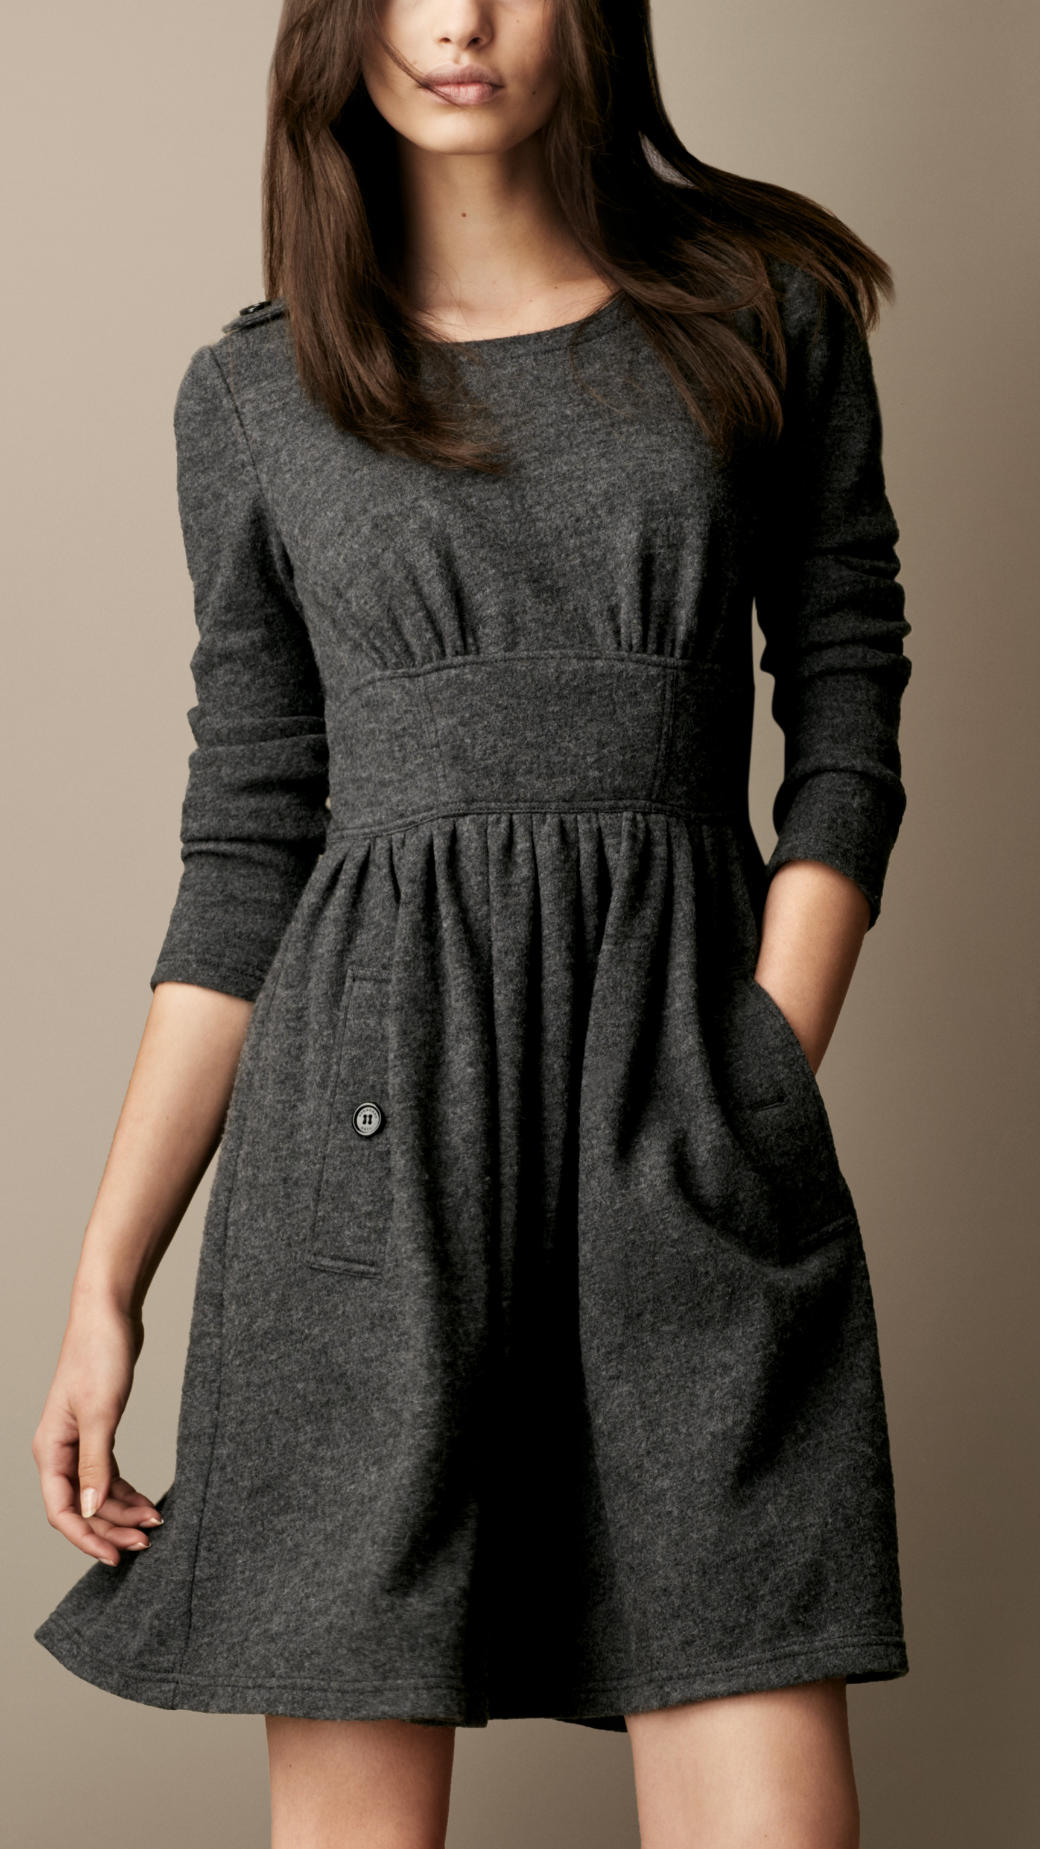 Lyst - Burberry Brit Gathered Wool Dress in Gray